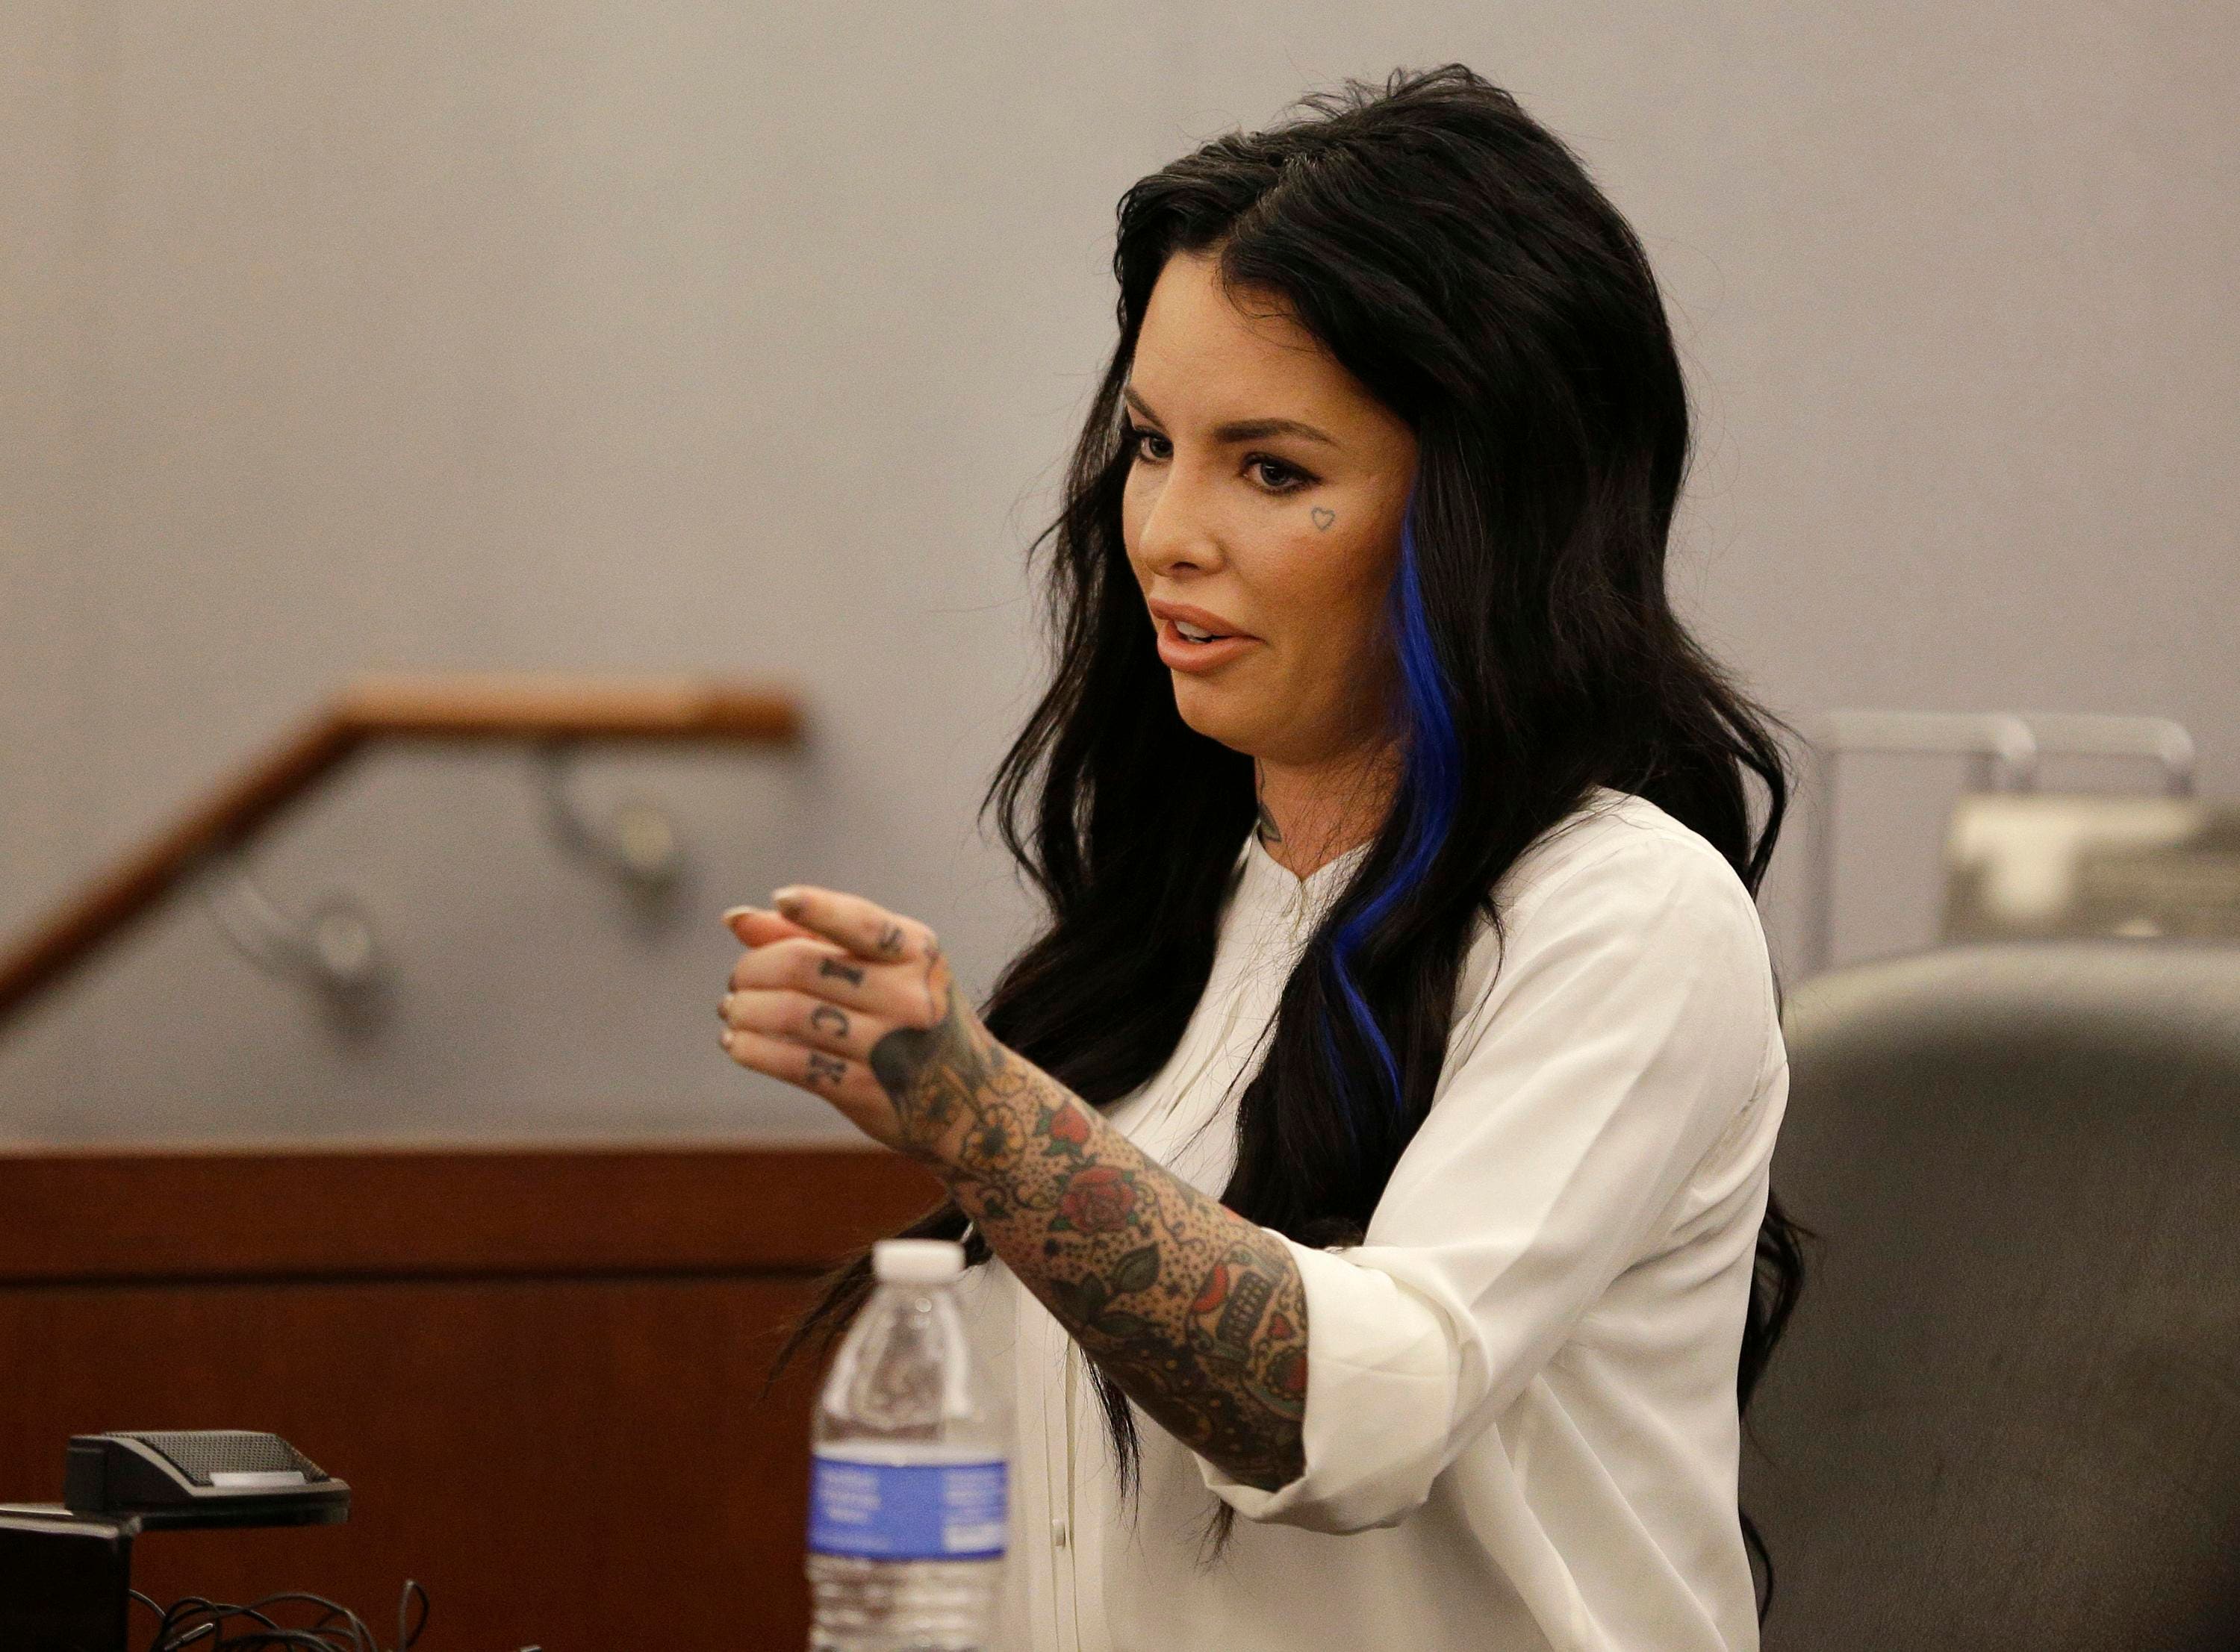 dennis denosta recommends christy mack before implants pic